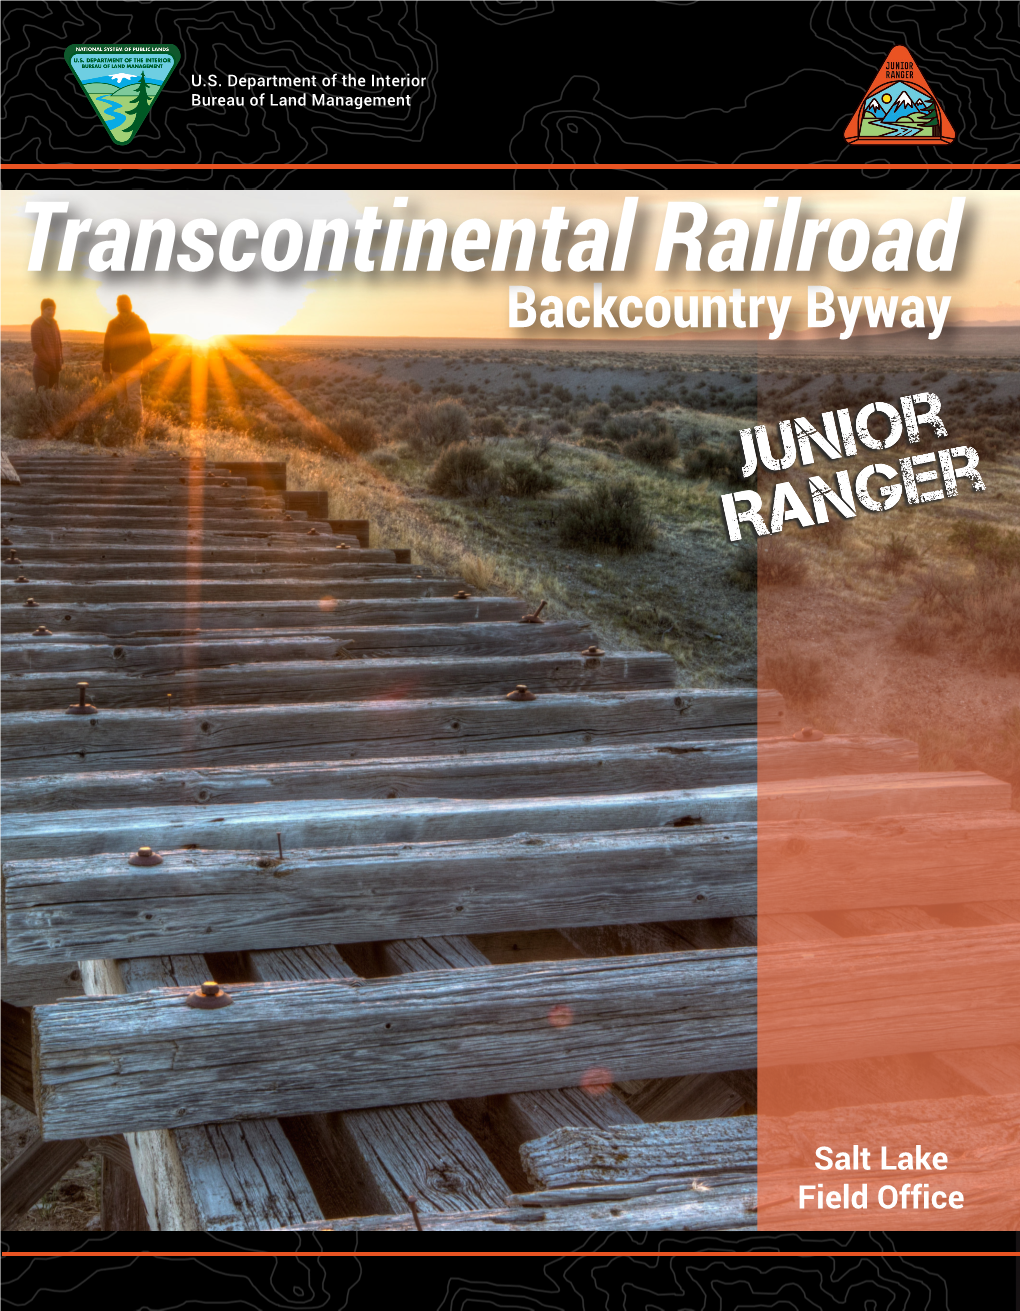 Transcontinental Railroad Backcountry Byway